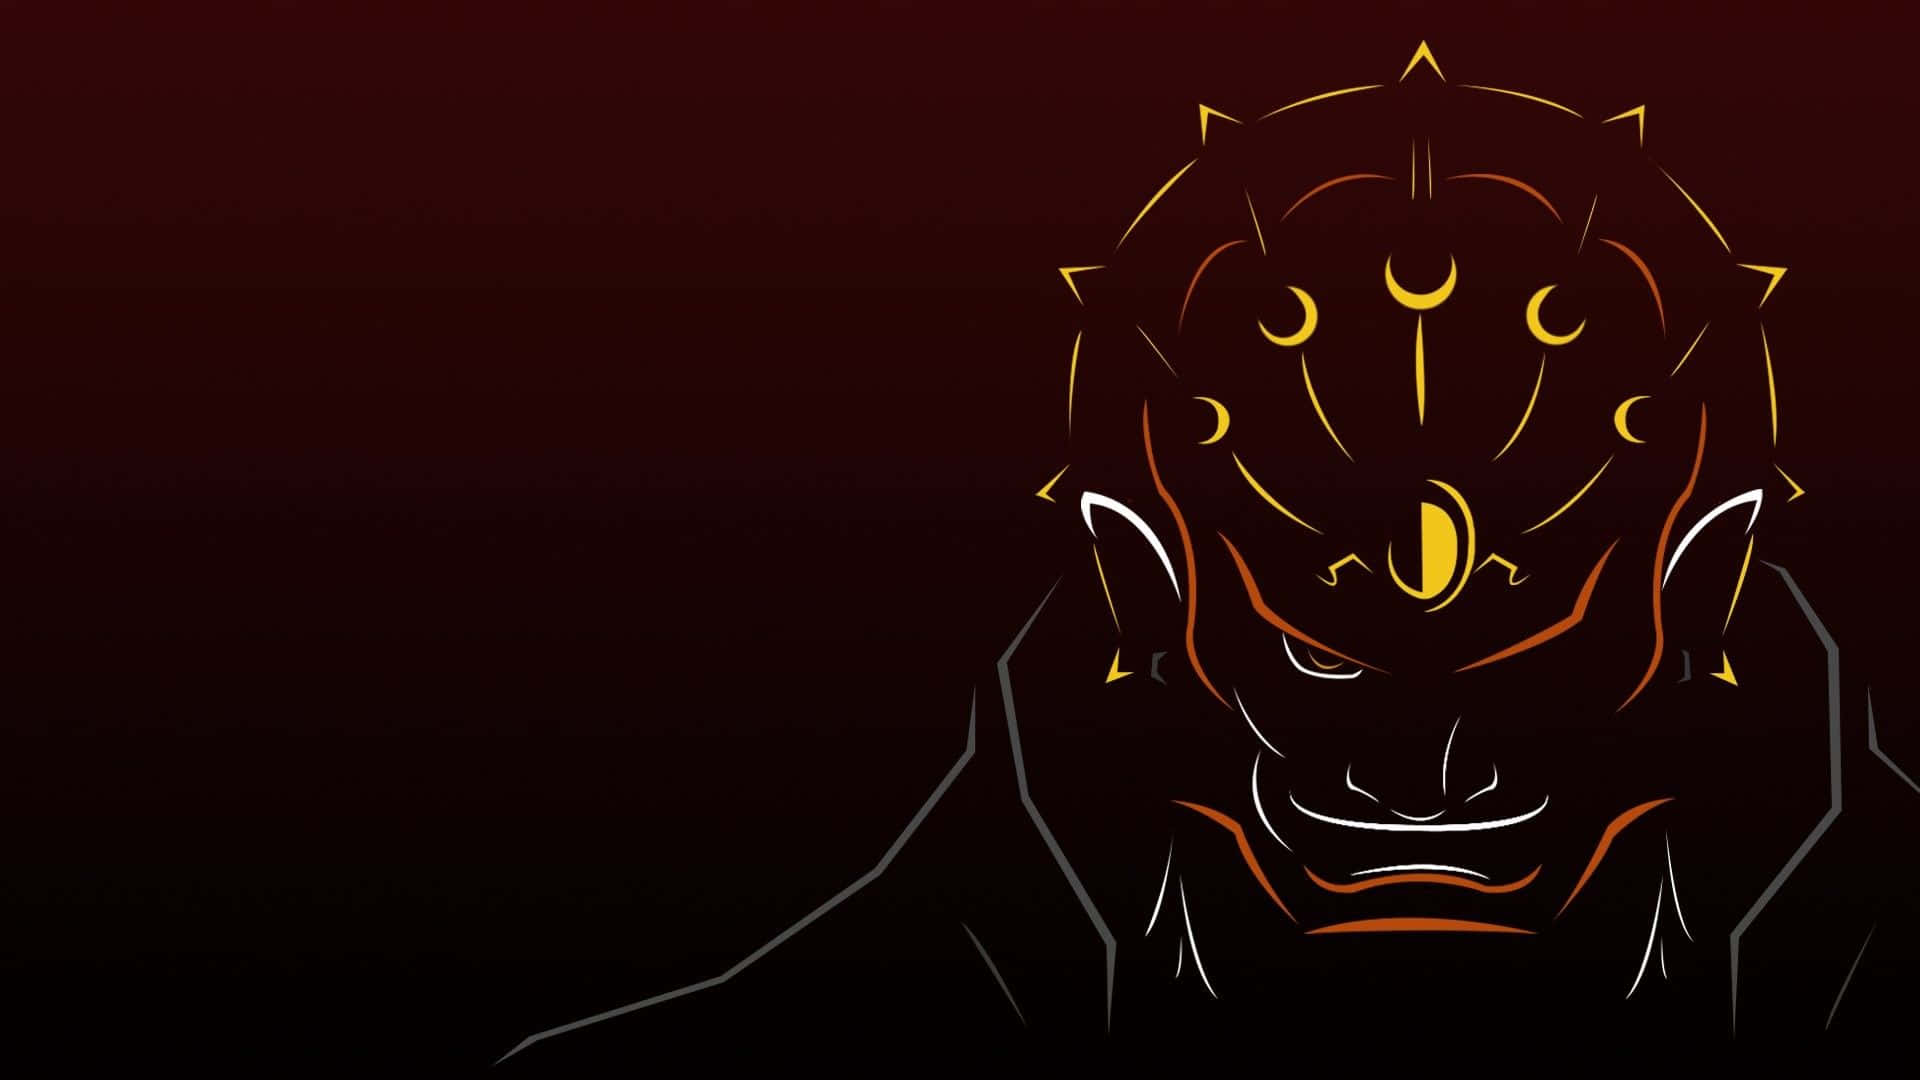 The powerful and menacing Ganondorf stands in victory Wallpaper